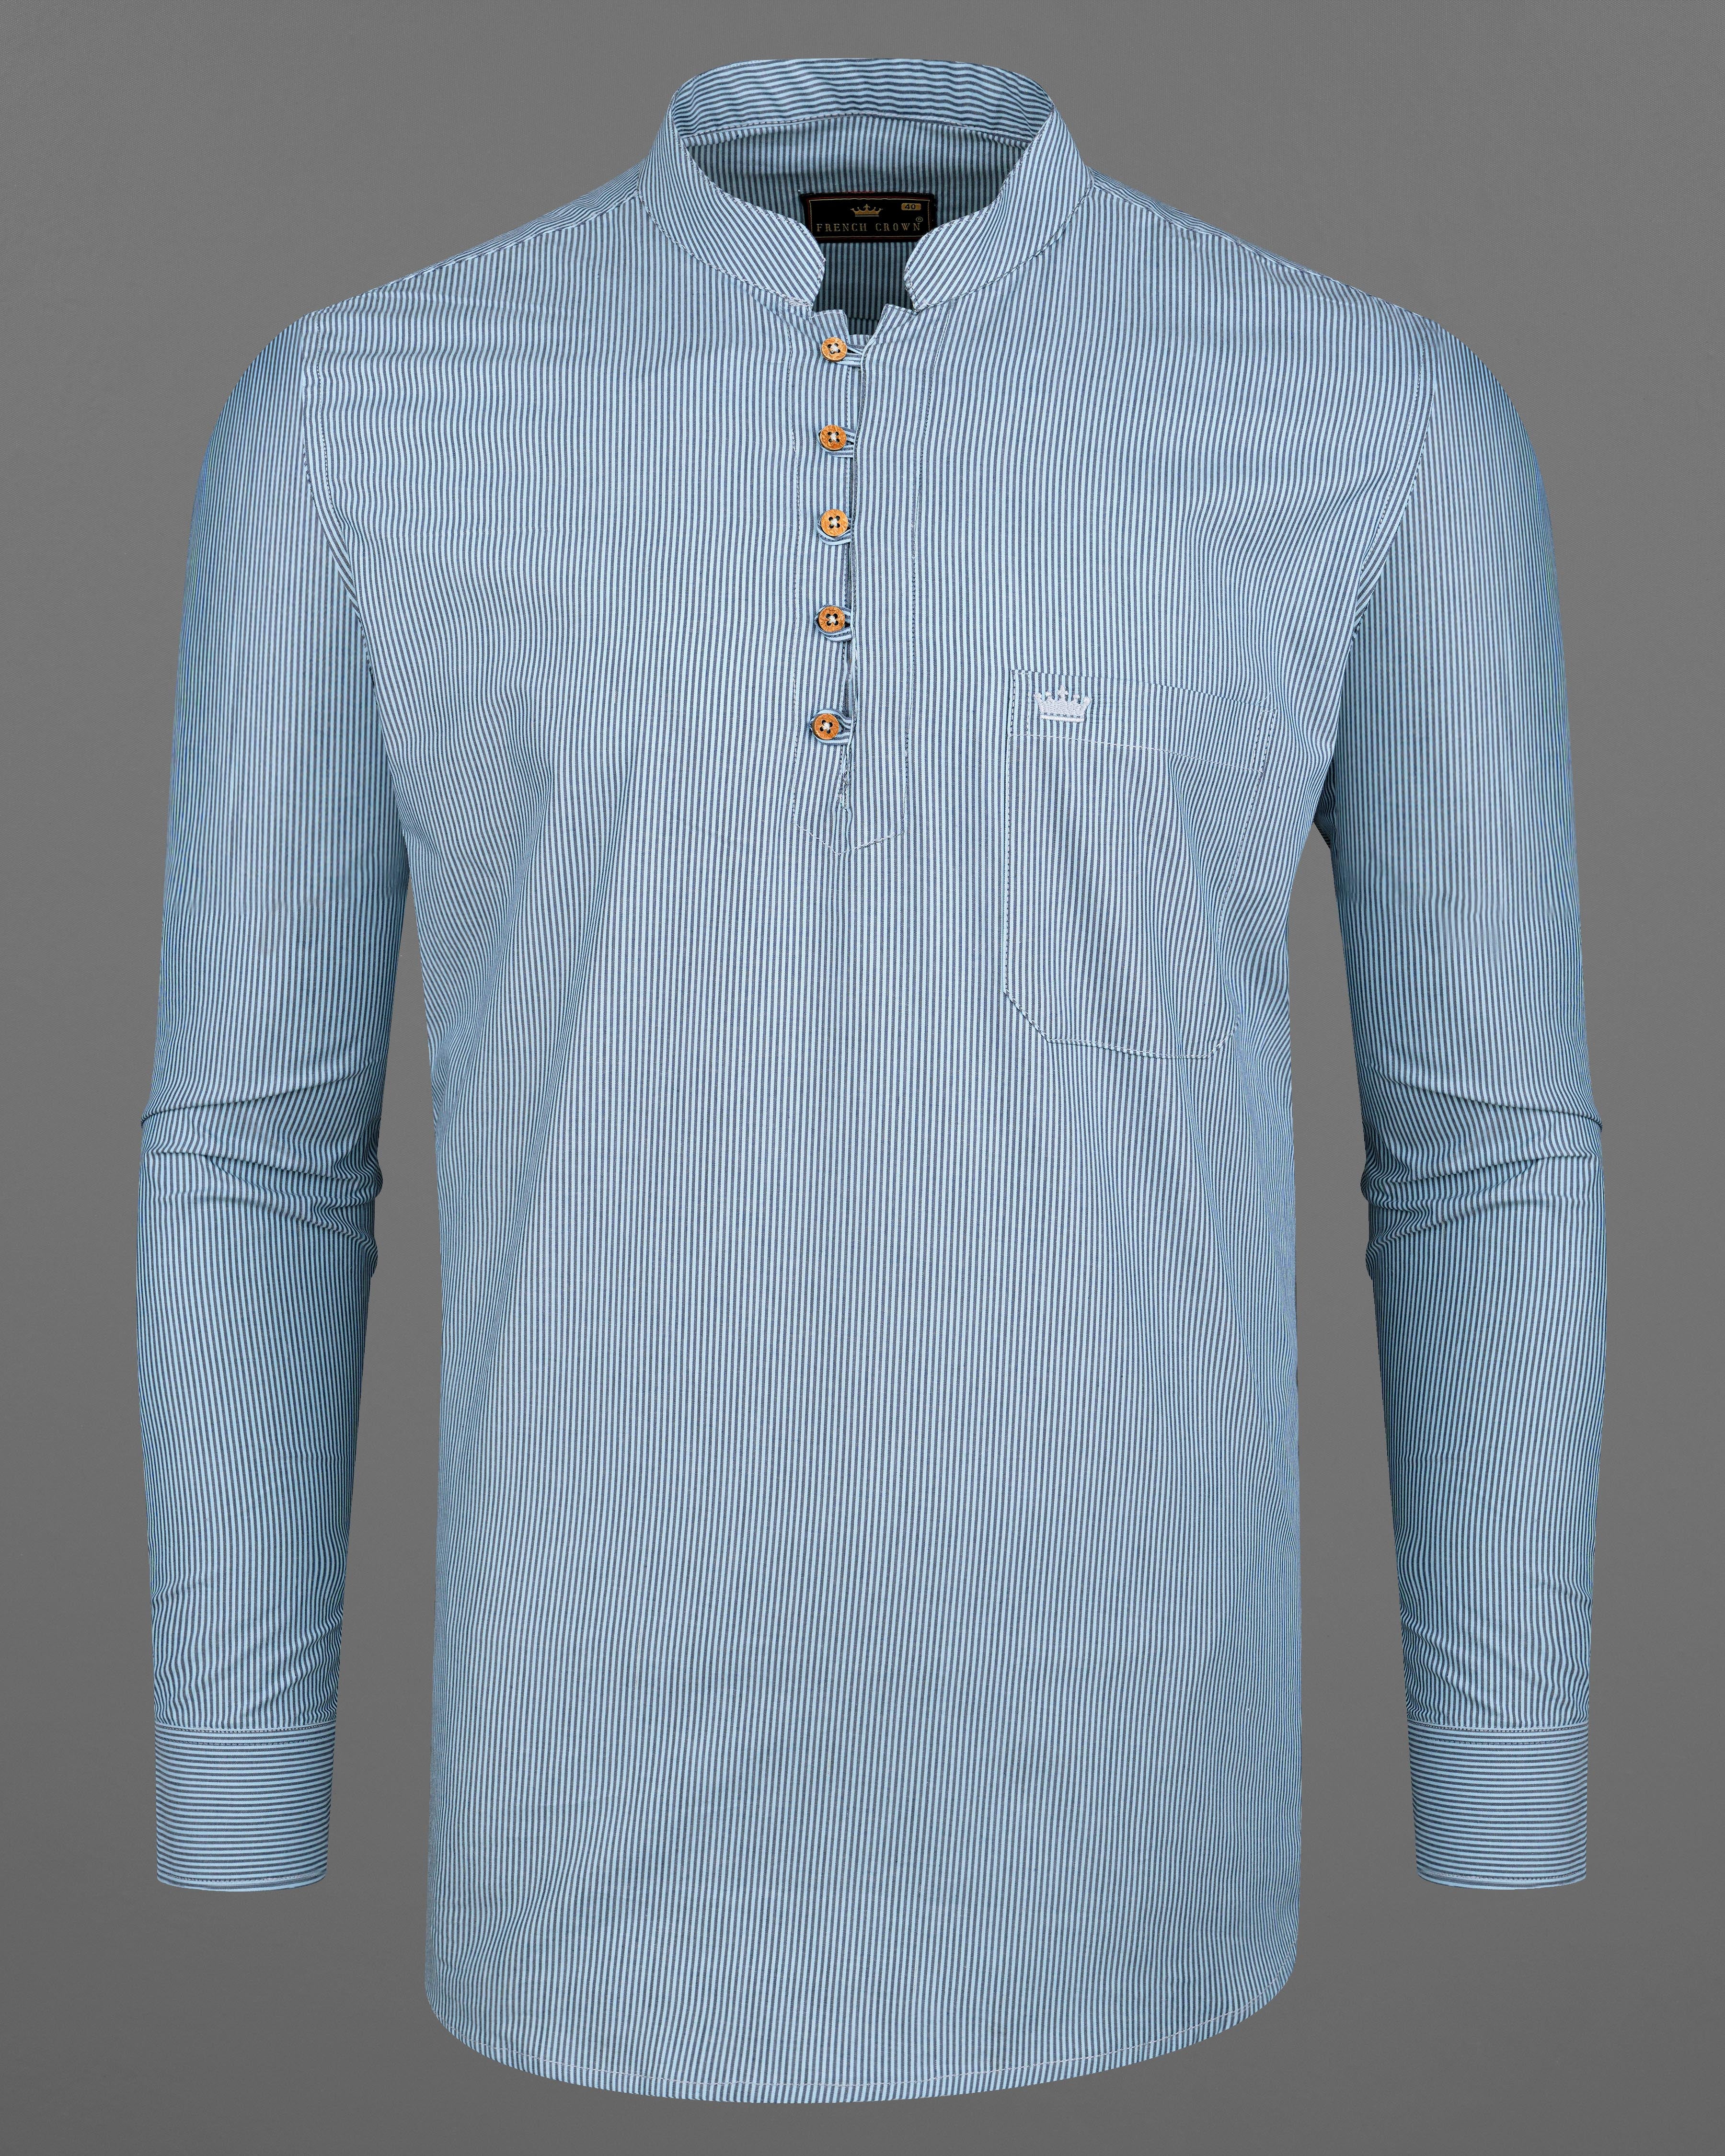 Spindle Blue and Timbe Navy Blue Striped Premium Cotton Kurta Shirt 8328-KS -38,8328-KS -H-38,8328-KS -39,8328-KS -H-39,8328-KS -40,8328-KS -H-40,8328-KS -42,8328-KS -H-42,8328-KS -44,8328-KS -H-44,8328-KS -46,8328-KS -H-46,8328-KS -48,8328-KS -H-48,8328-KS -50,8328-KS -H-50,8328-KS -52,8328-KS -H-52